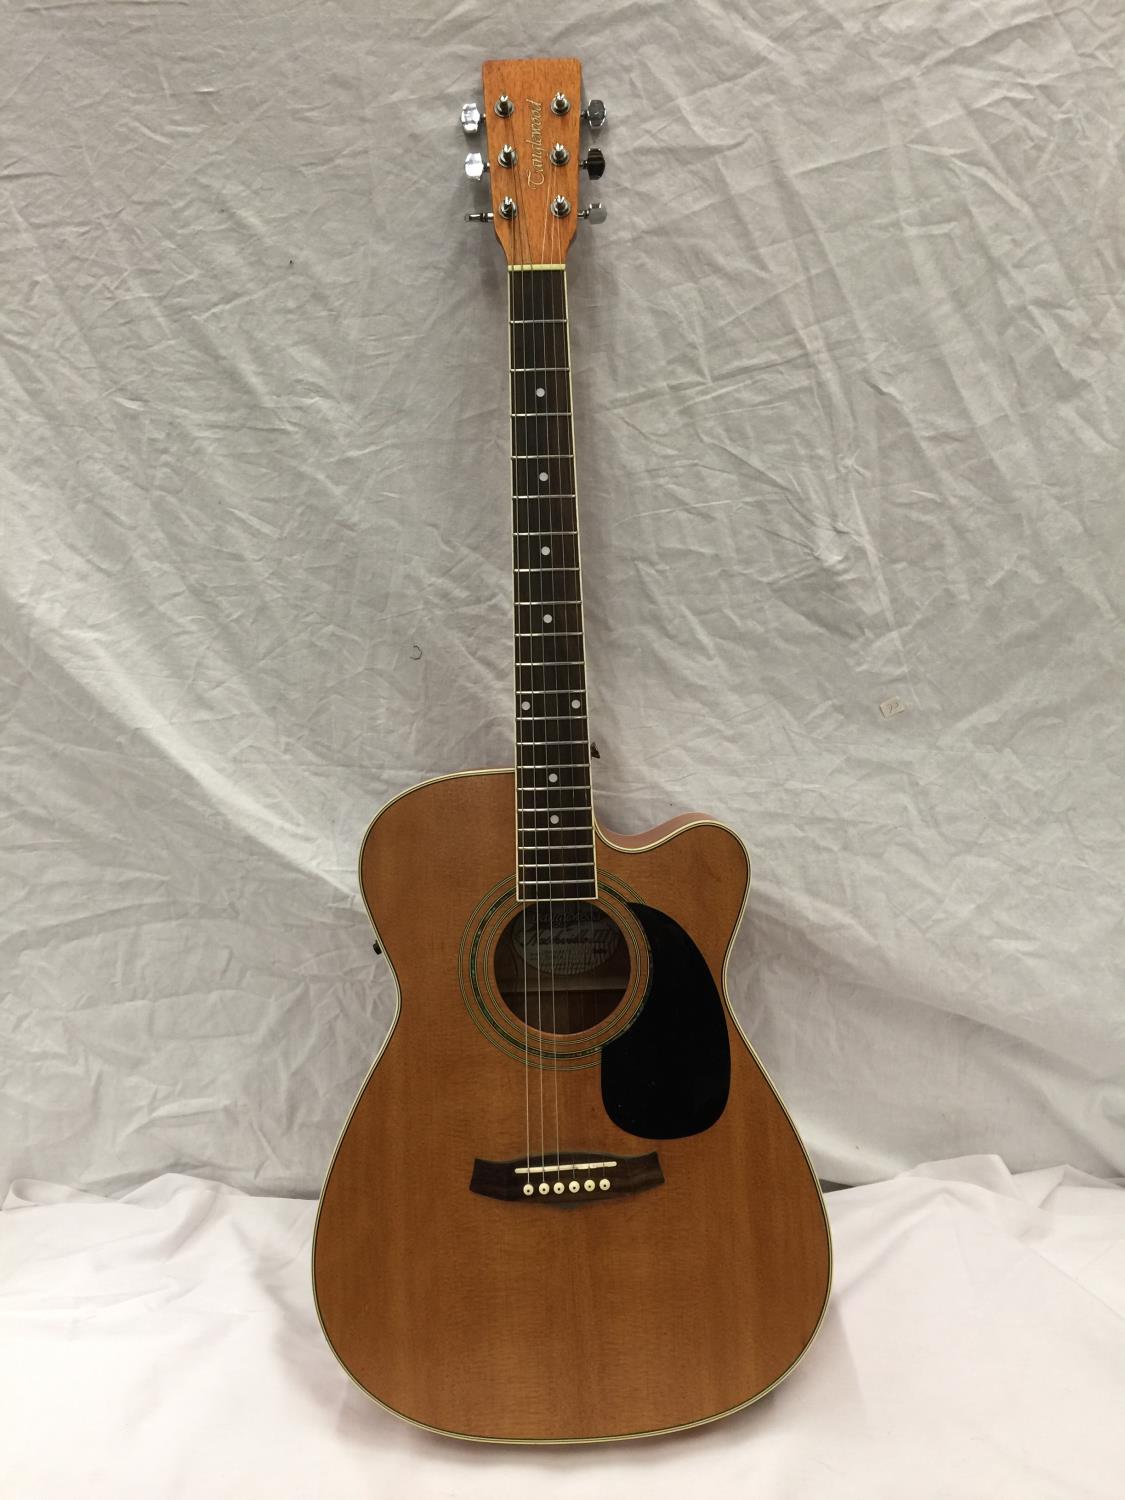 A TANGLEWOOD NASHVILLE SEMI ACOUSTIC GUITAR - Image 2 of 15